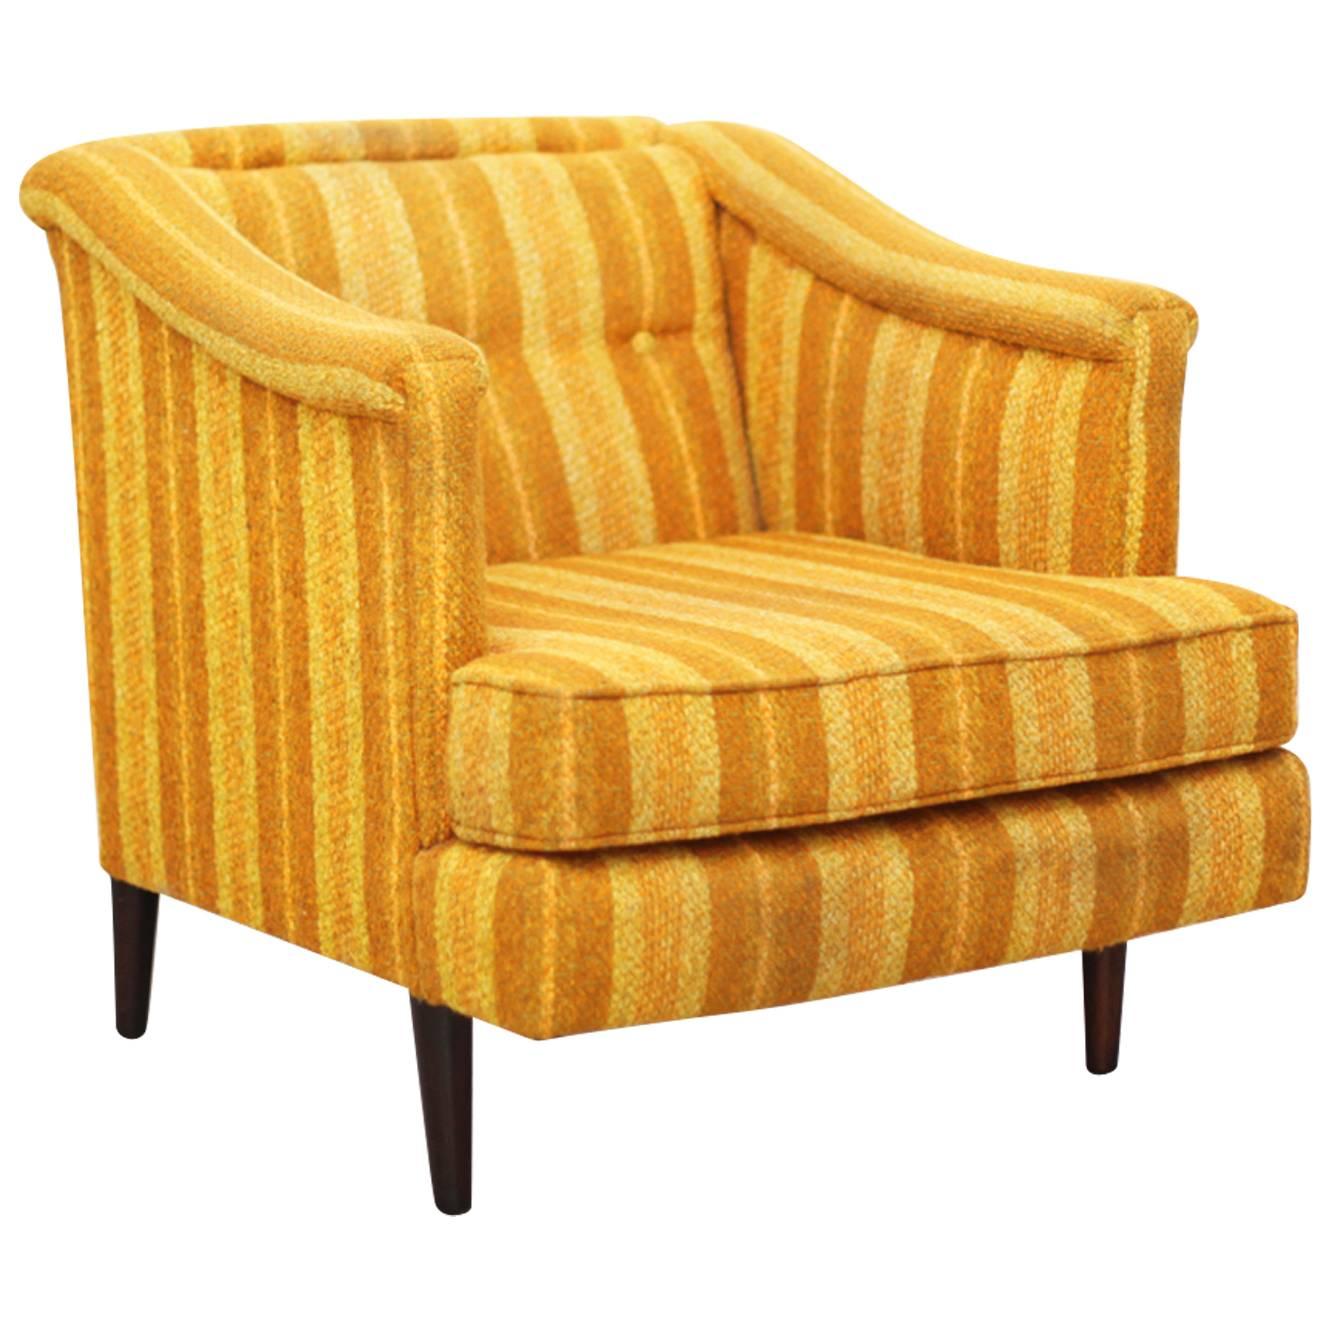 Edward Wormley Yellow Lounge Chair for Dunbar, Reupholstery Needed